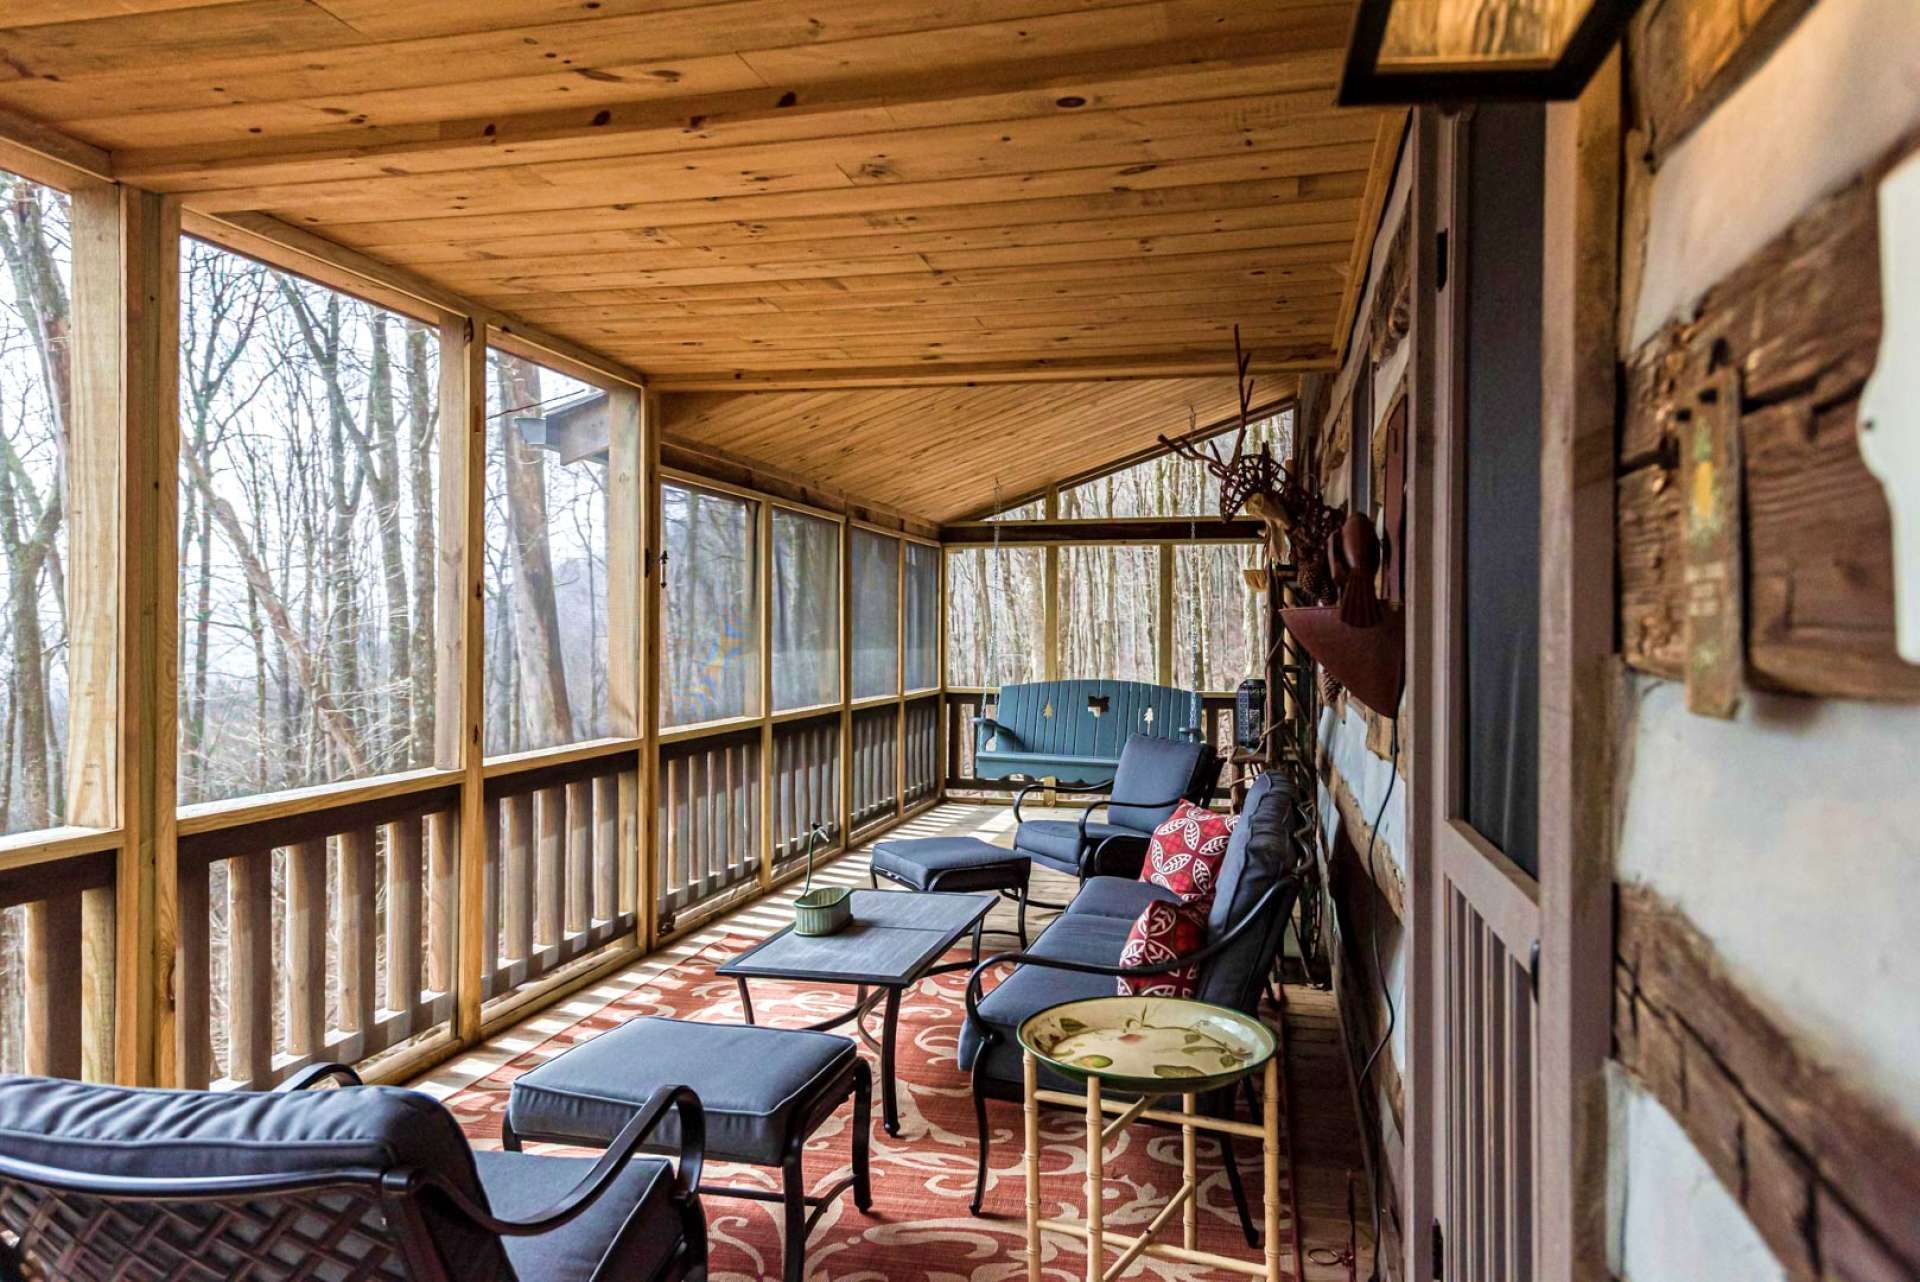 Enjoy the ever changing mountain scenery all year round on this spacious outdoor porch with heavy duty screening.